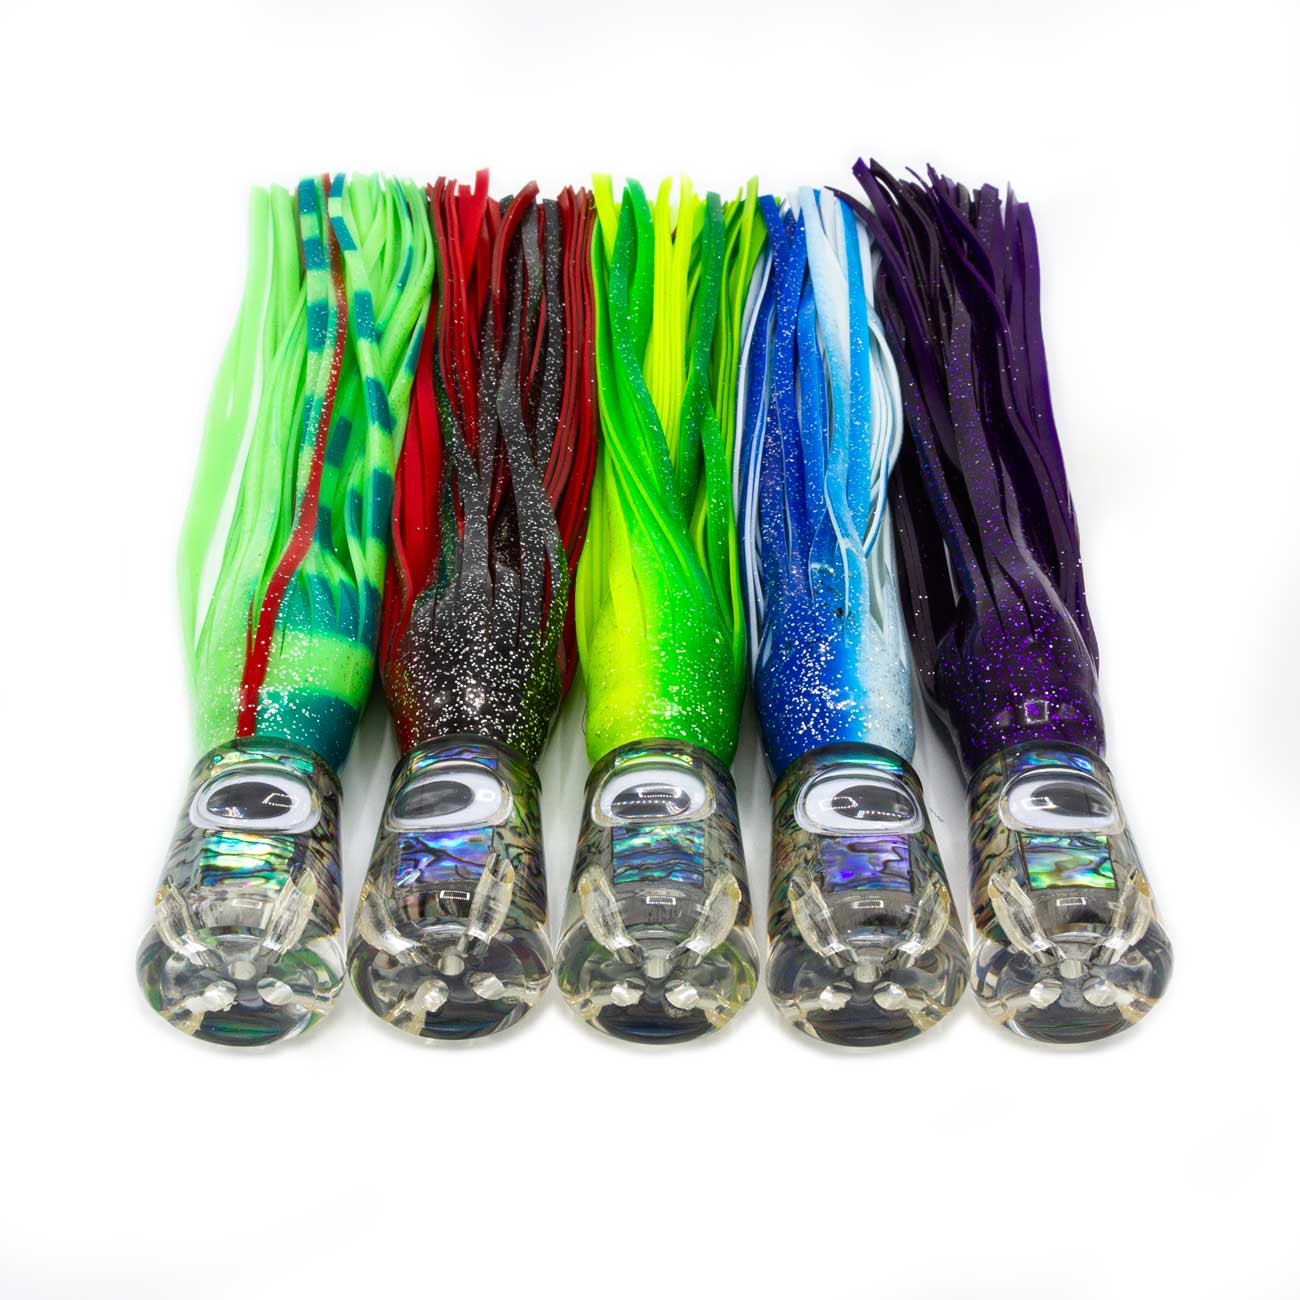 Rite Angler 11" Jethead set of 5 pre-rigged Trolling Lures